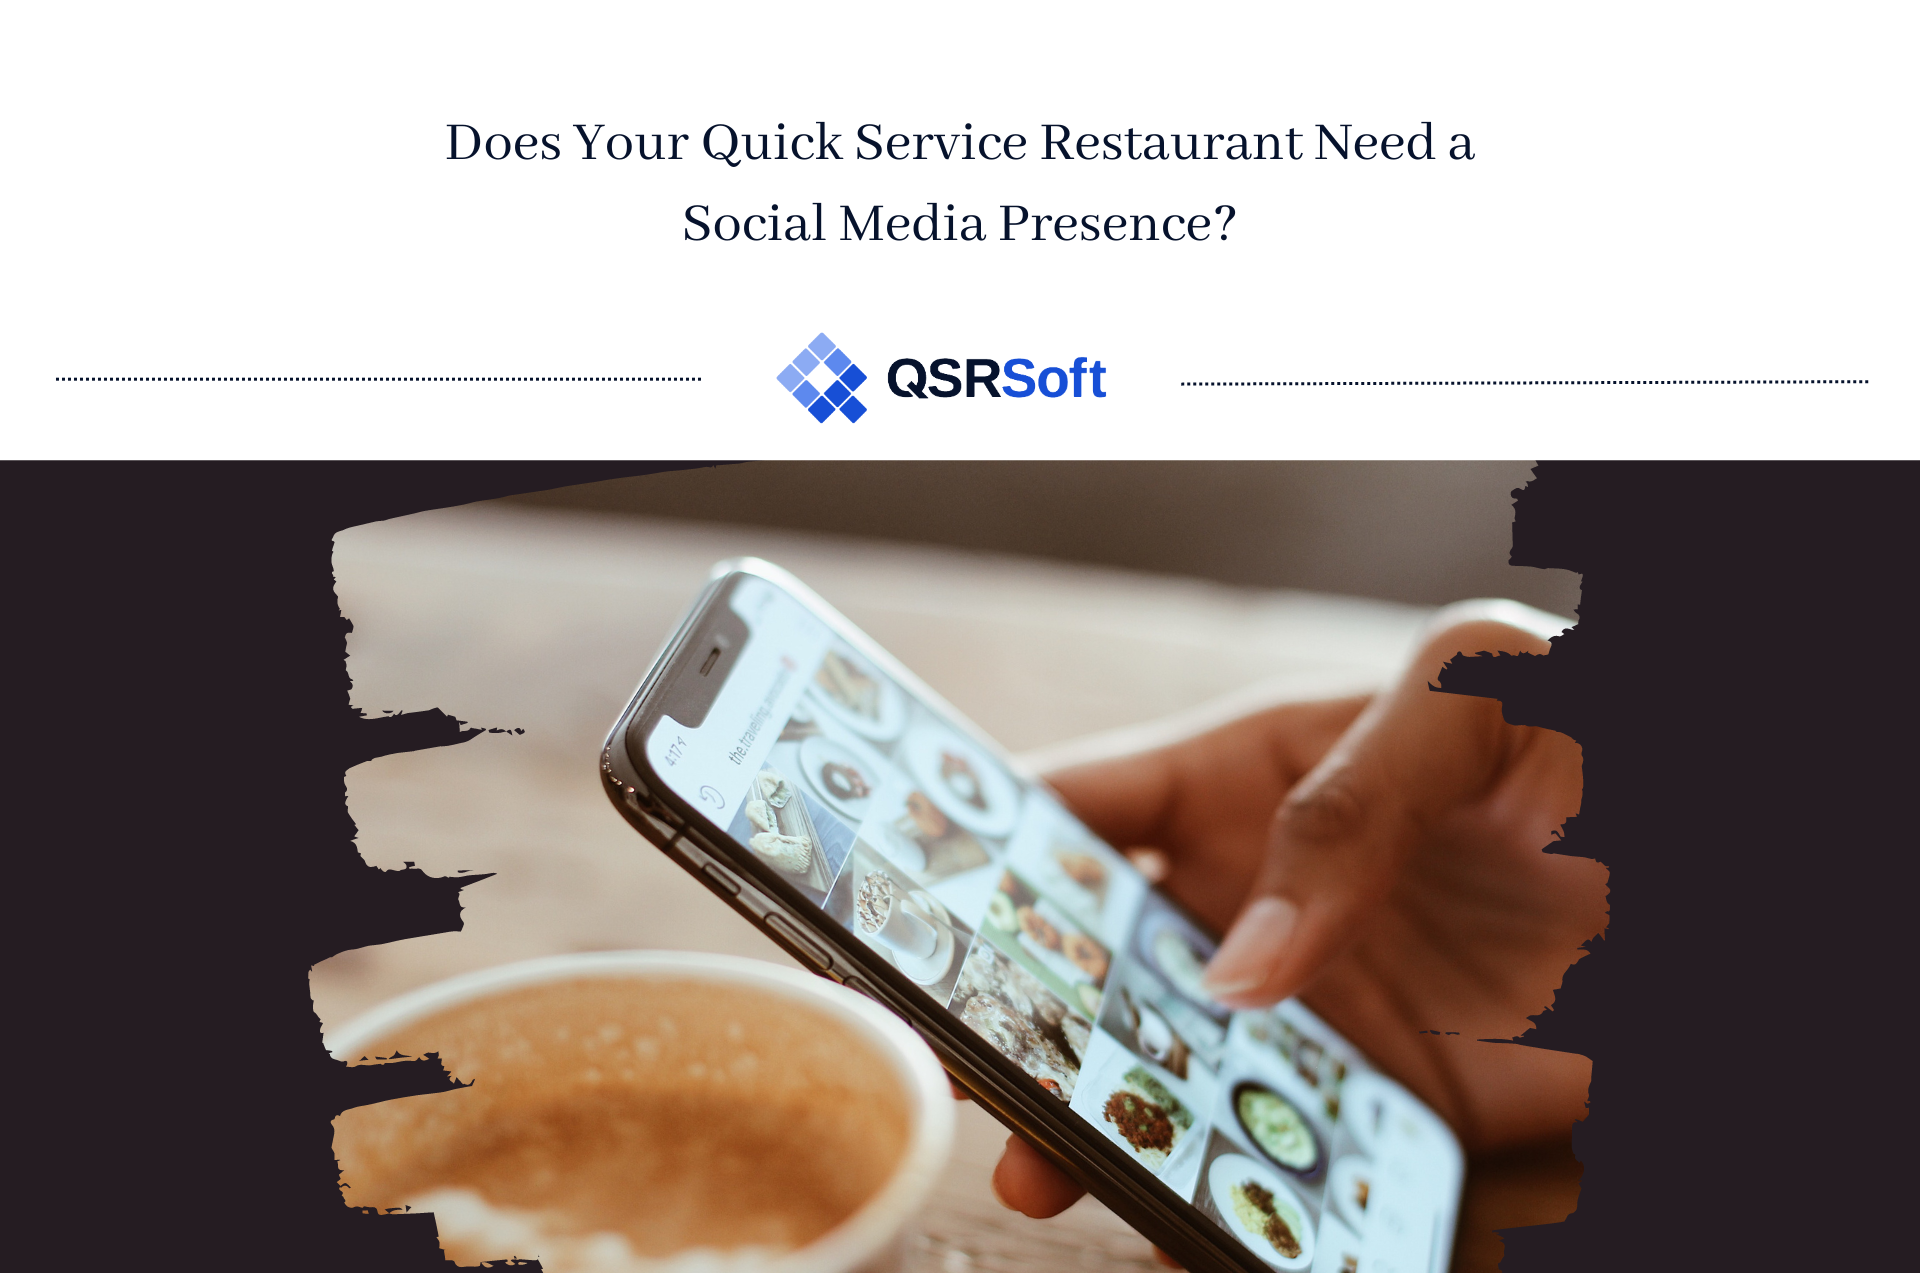 Does Your Quick Service Restaurant Need a Social Media Presence?